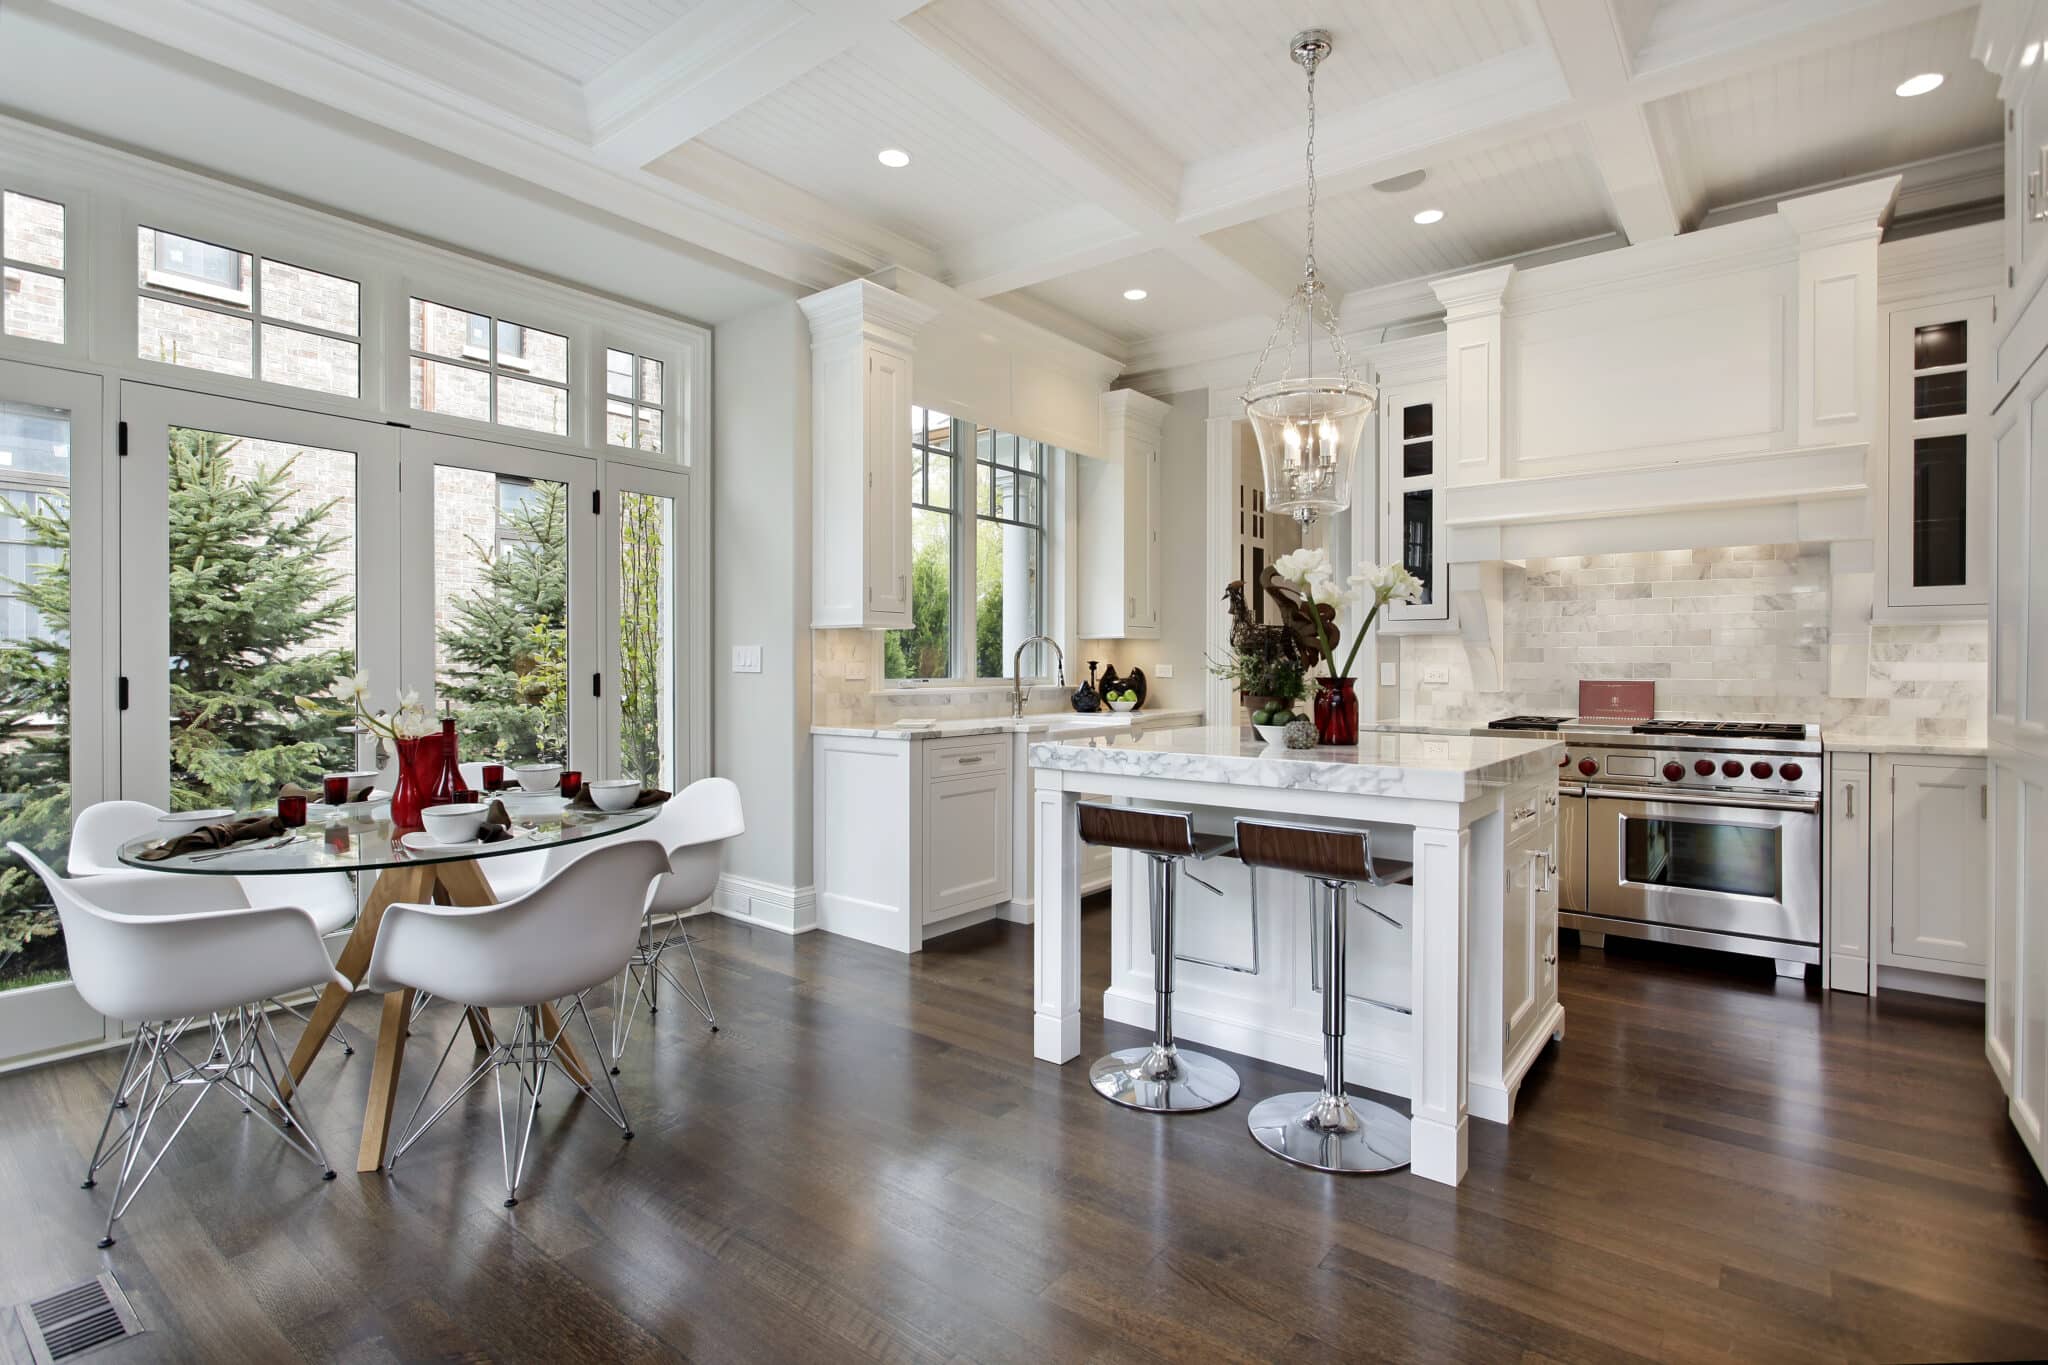 Make a Kitchen Look More Elegant and welcoming